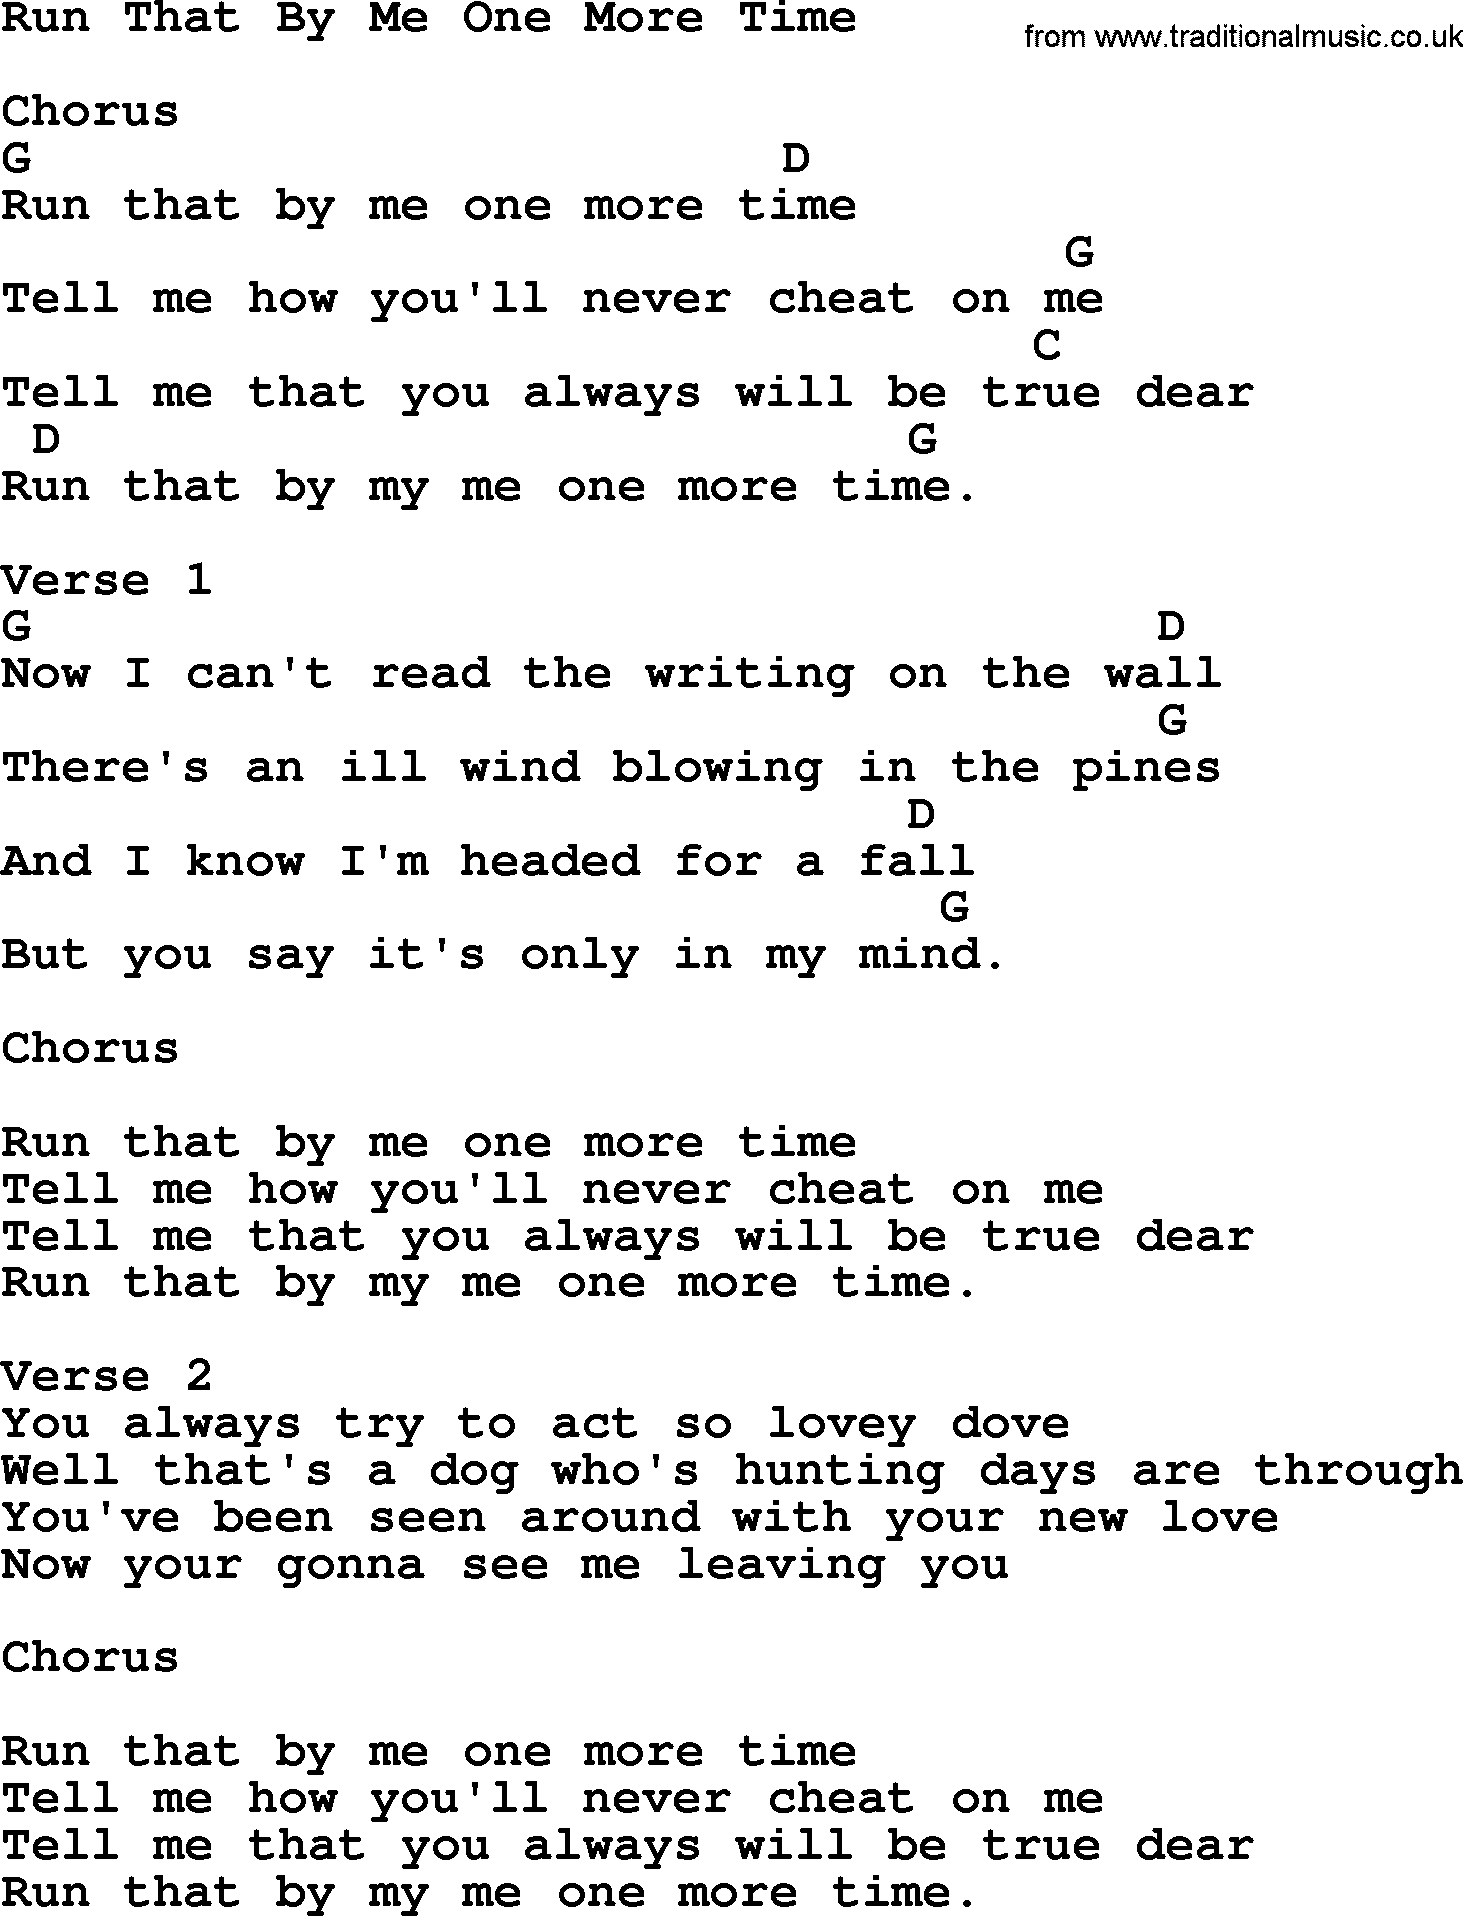 Willie Nelson song: Run That By Me One More Time, lyrics and chords